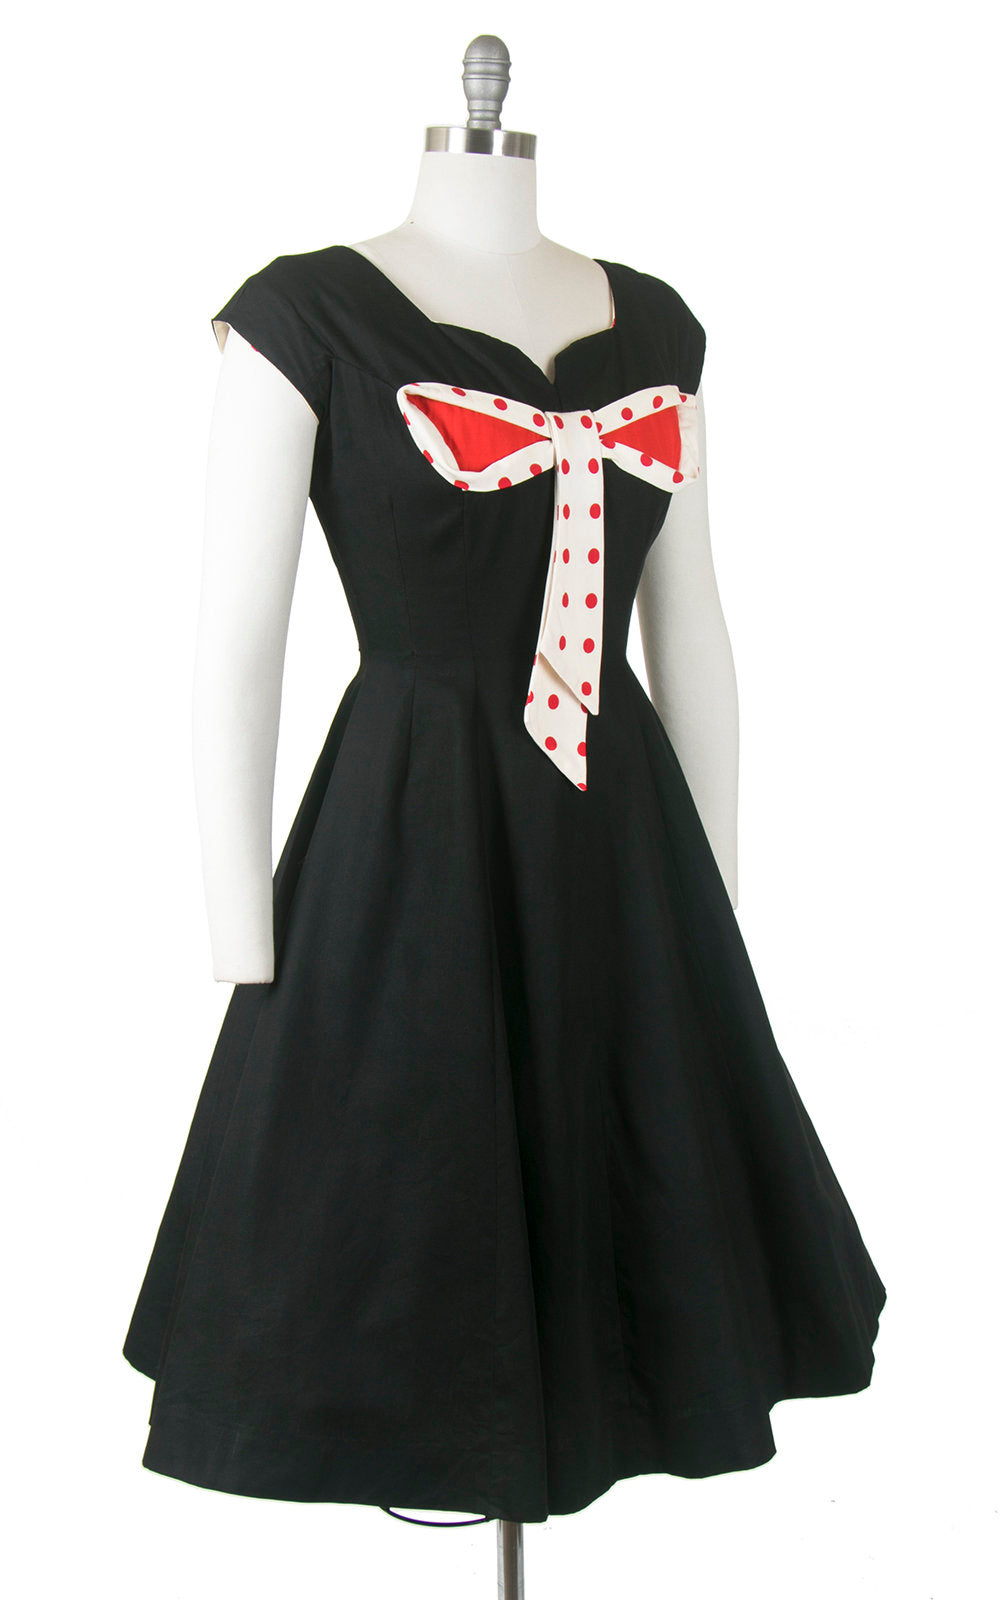 Vintage 1950s Dress | 50s MISS ELLIETTE Polka Dot Bow Cotton Black Red Full Skirt Holiday Party Day Dress (small)